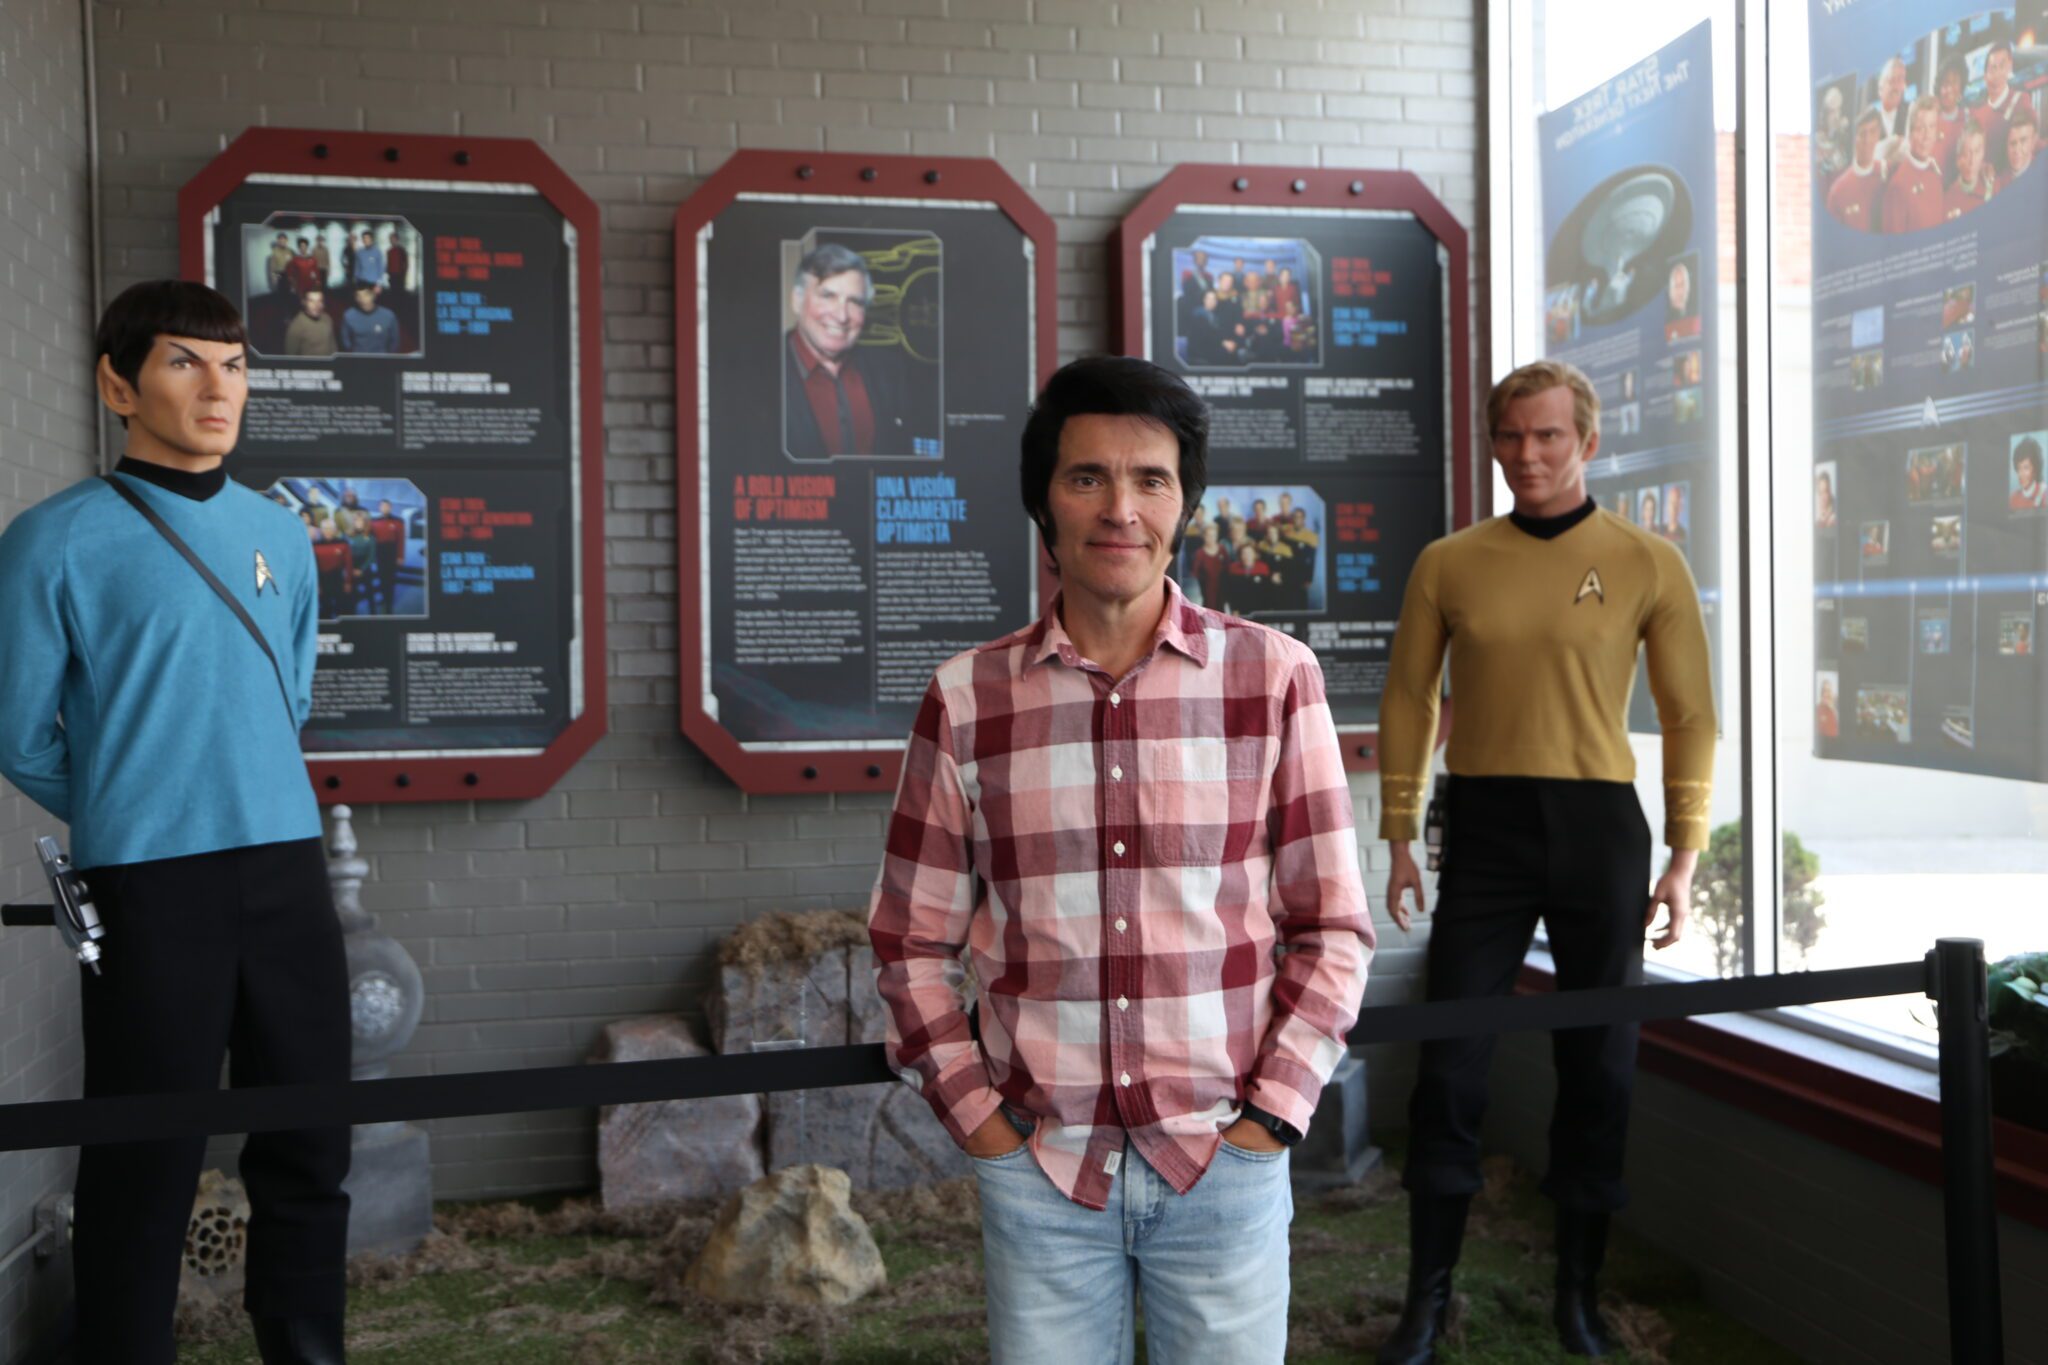 James Cawley, owner of the Star Trek Original Series Set Tour and a 38-year Elvis impersonator, opened his business's doors in Ticonderoga on Monday to welcome Star Trek and outer space enthusiasts during the 2024 solar eclipse in Ticonderoga.